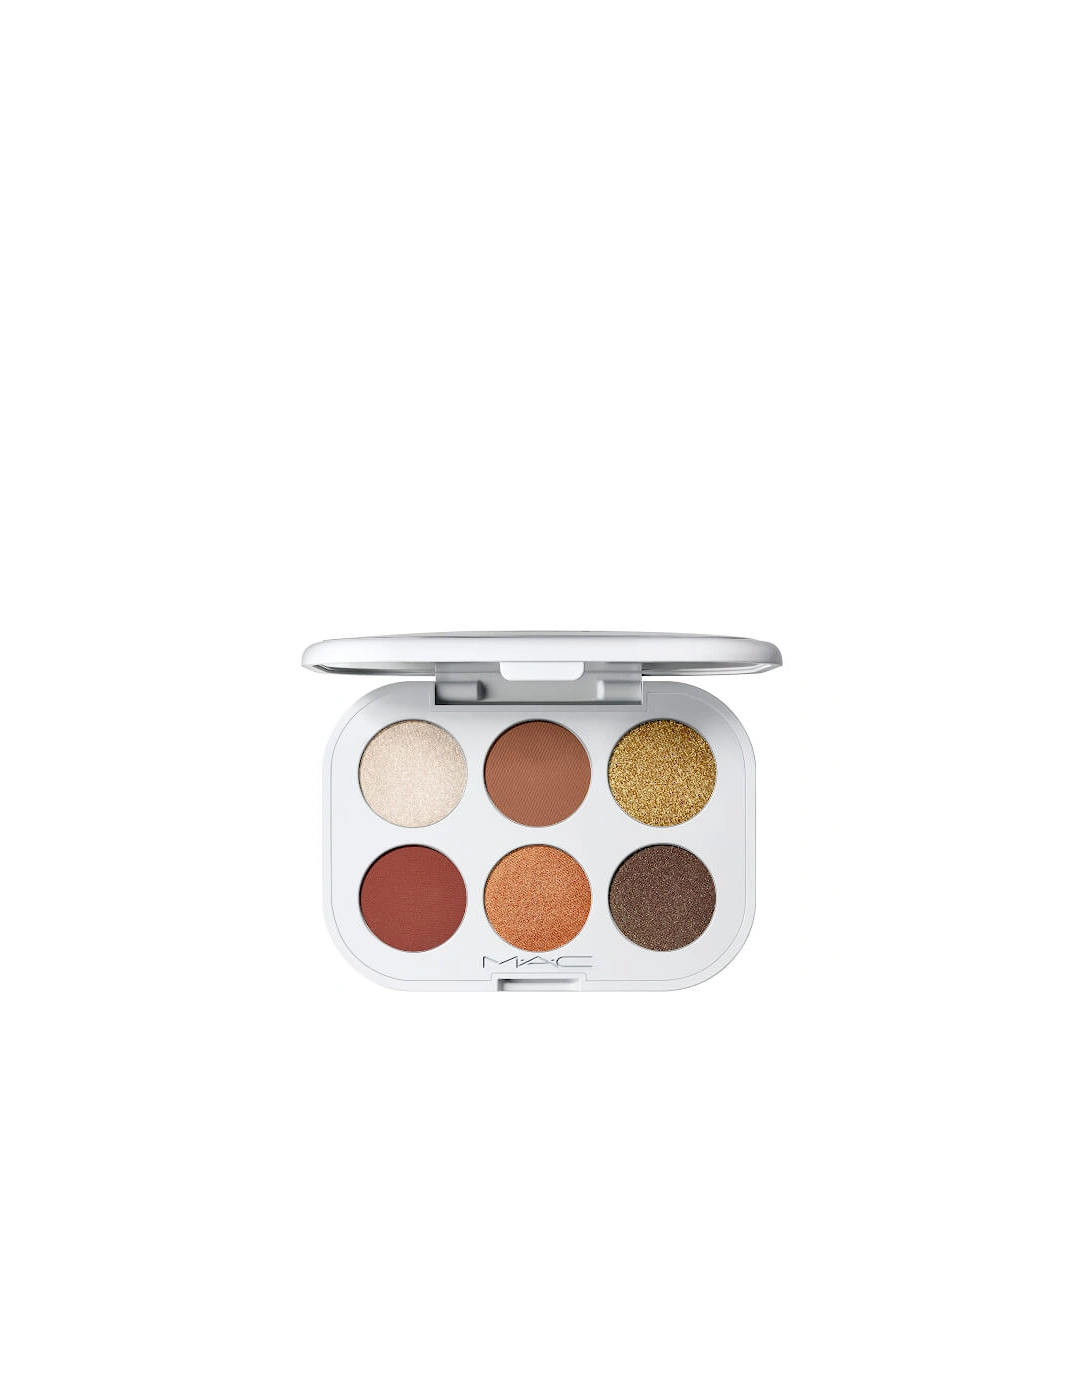 Squall Goals Eye Shadow Palette x 6 - Cabin Fever, 2 of 1